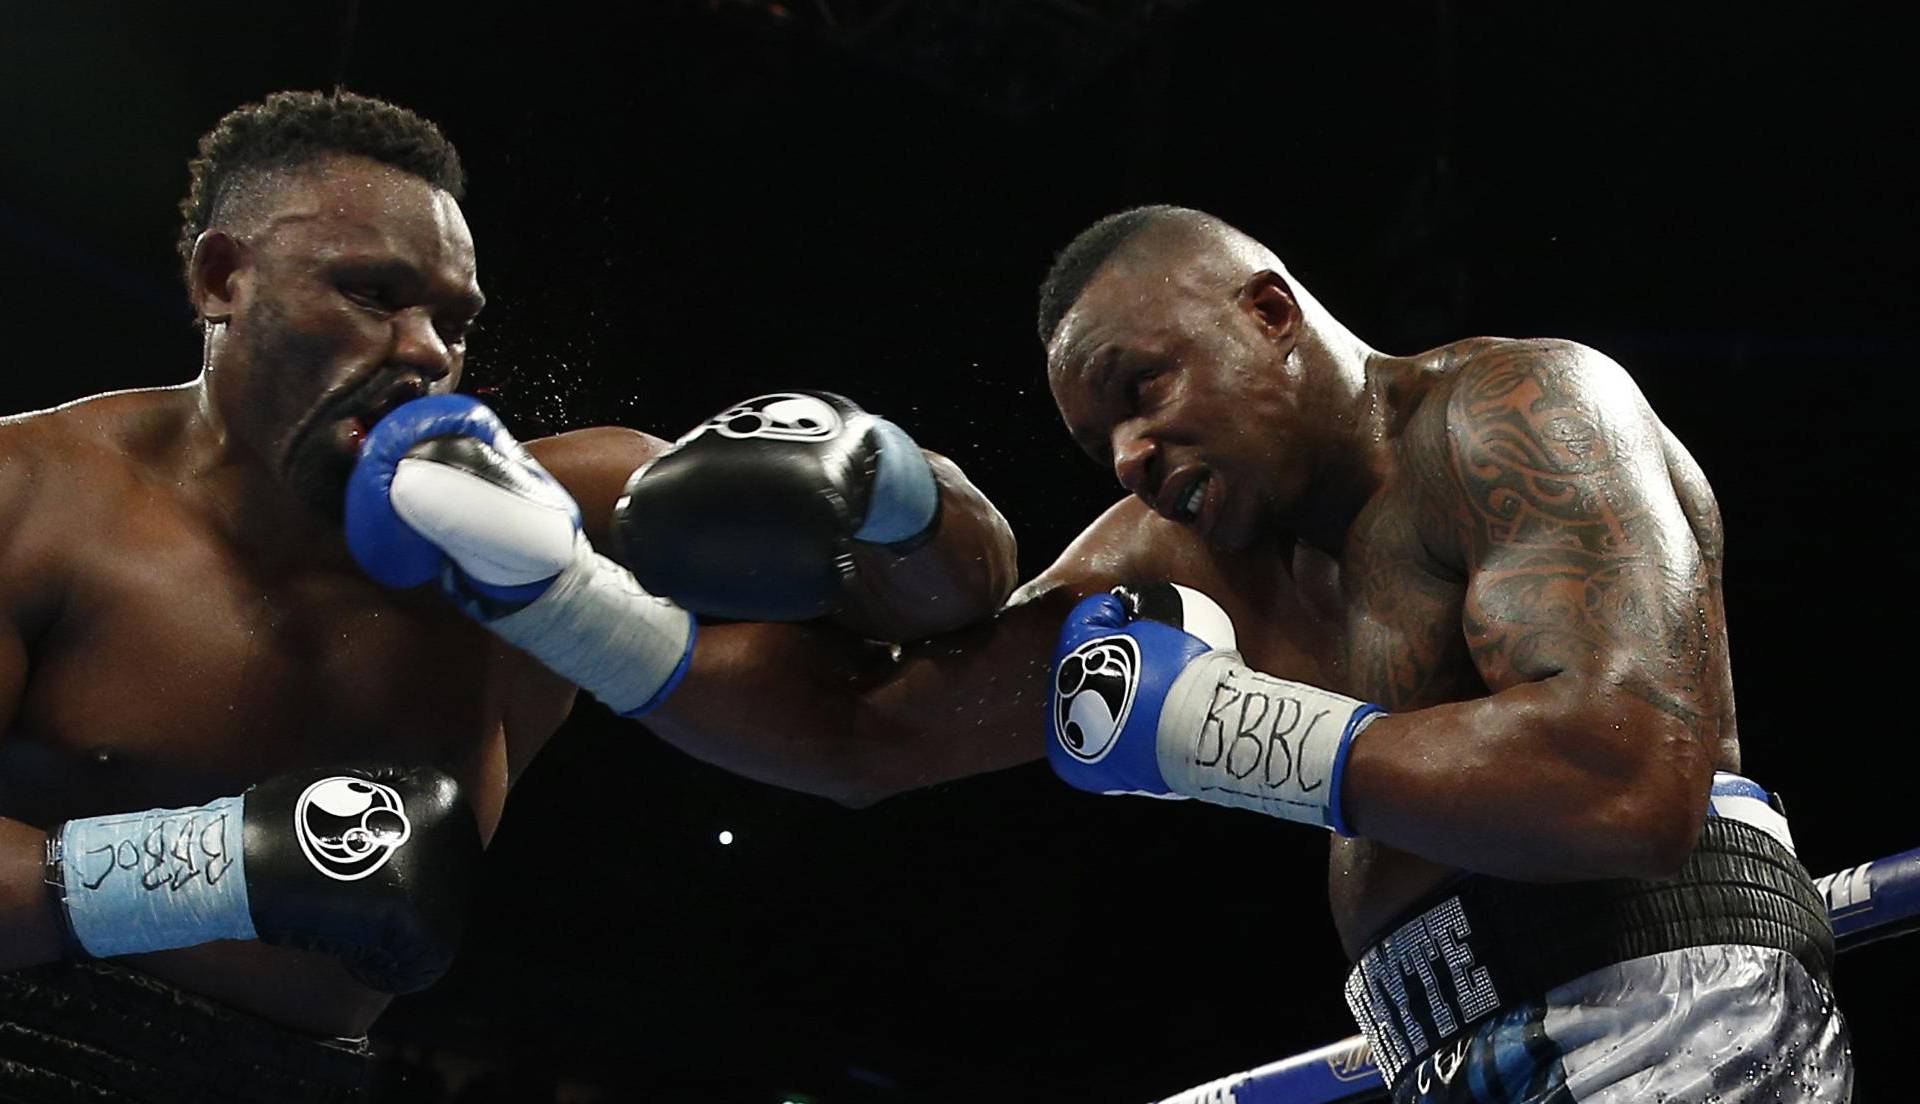 Dillian Whyte (R) in action against Dereck Chisora